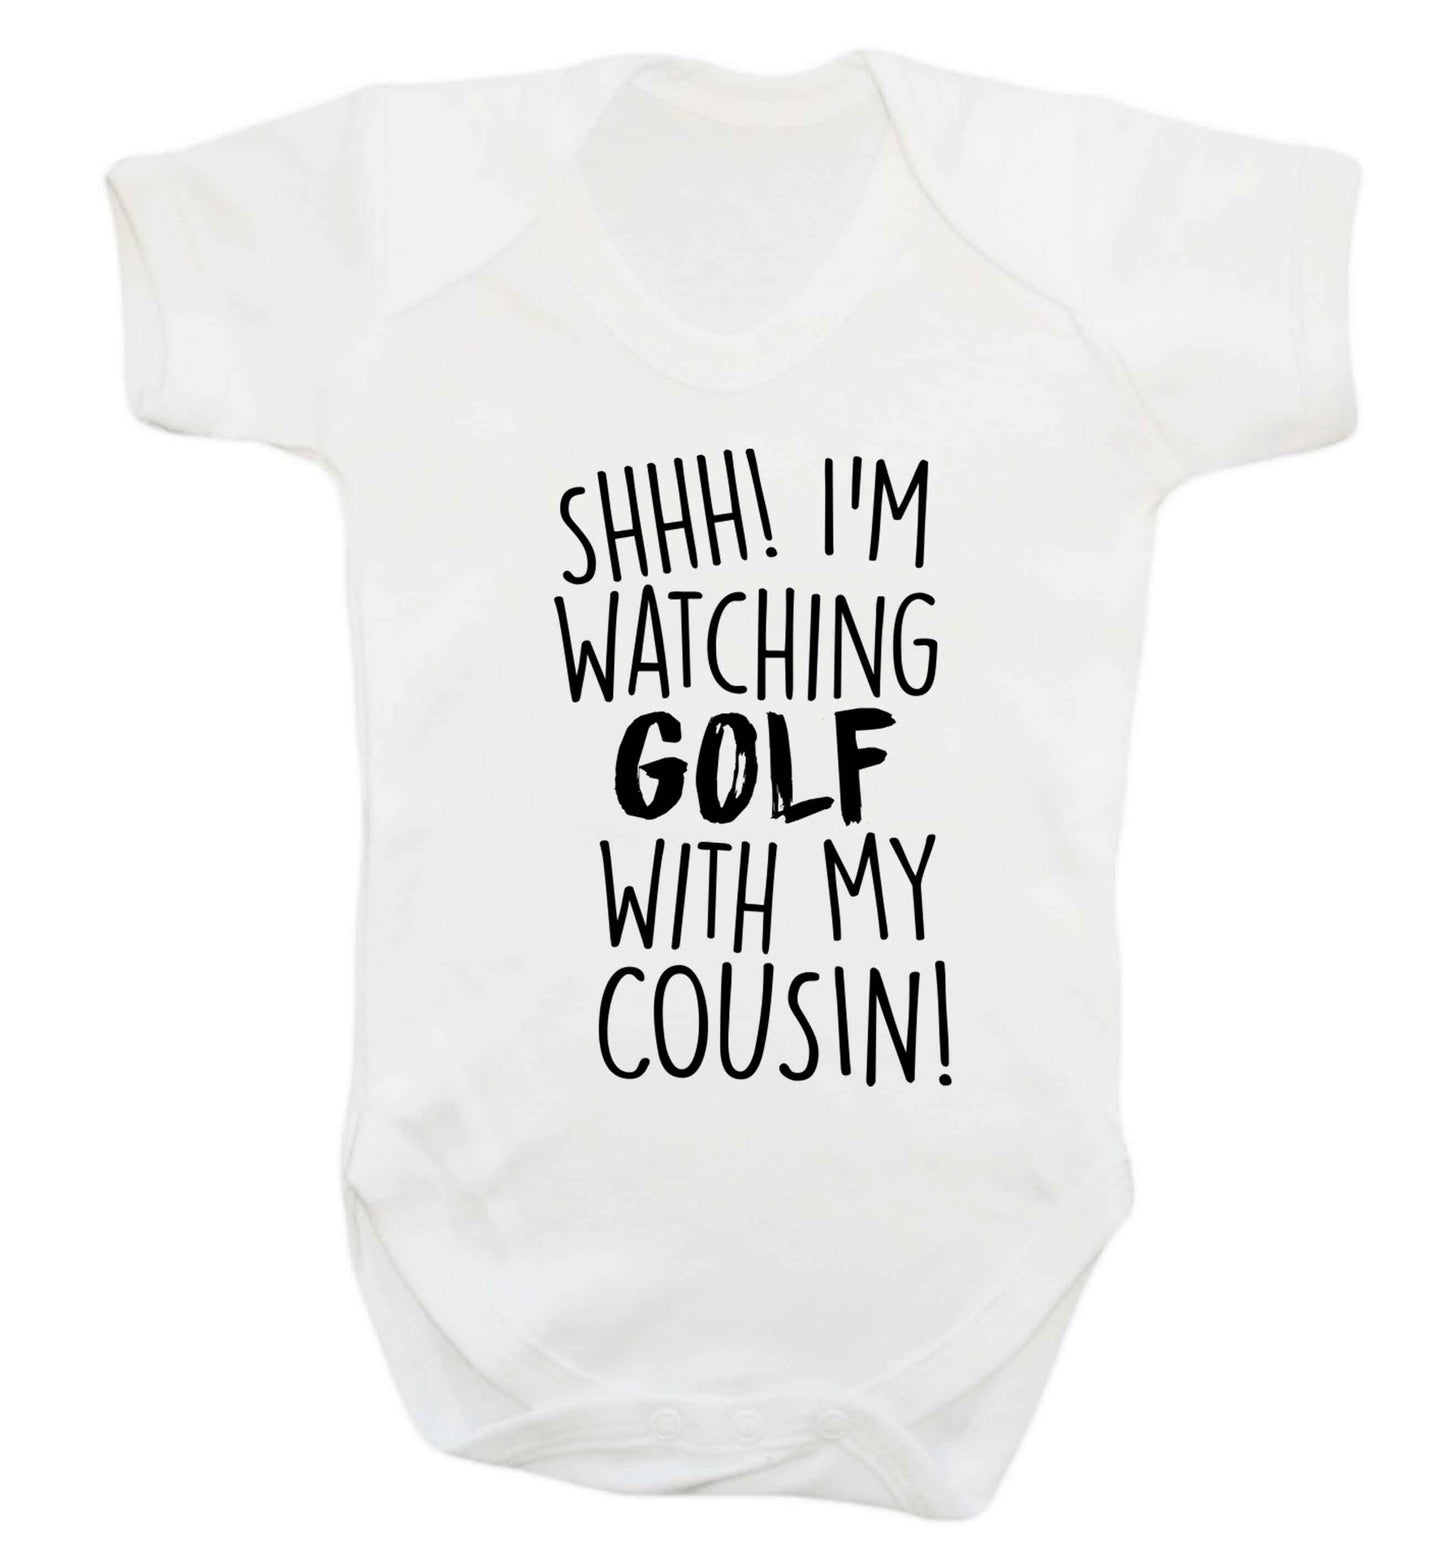 Shh I'm watching golf with my cousin Baby Vest white 18-24 months